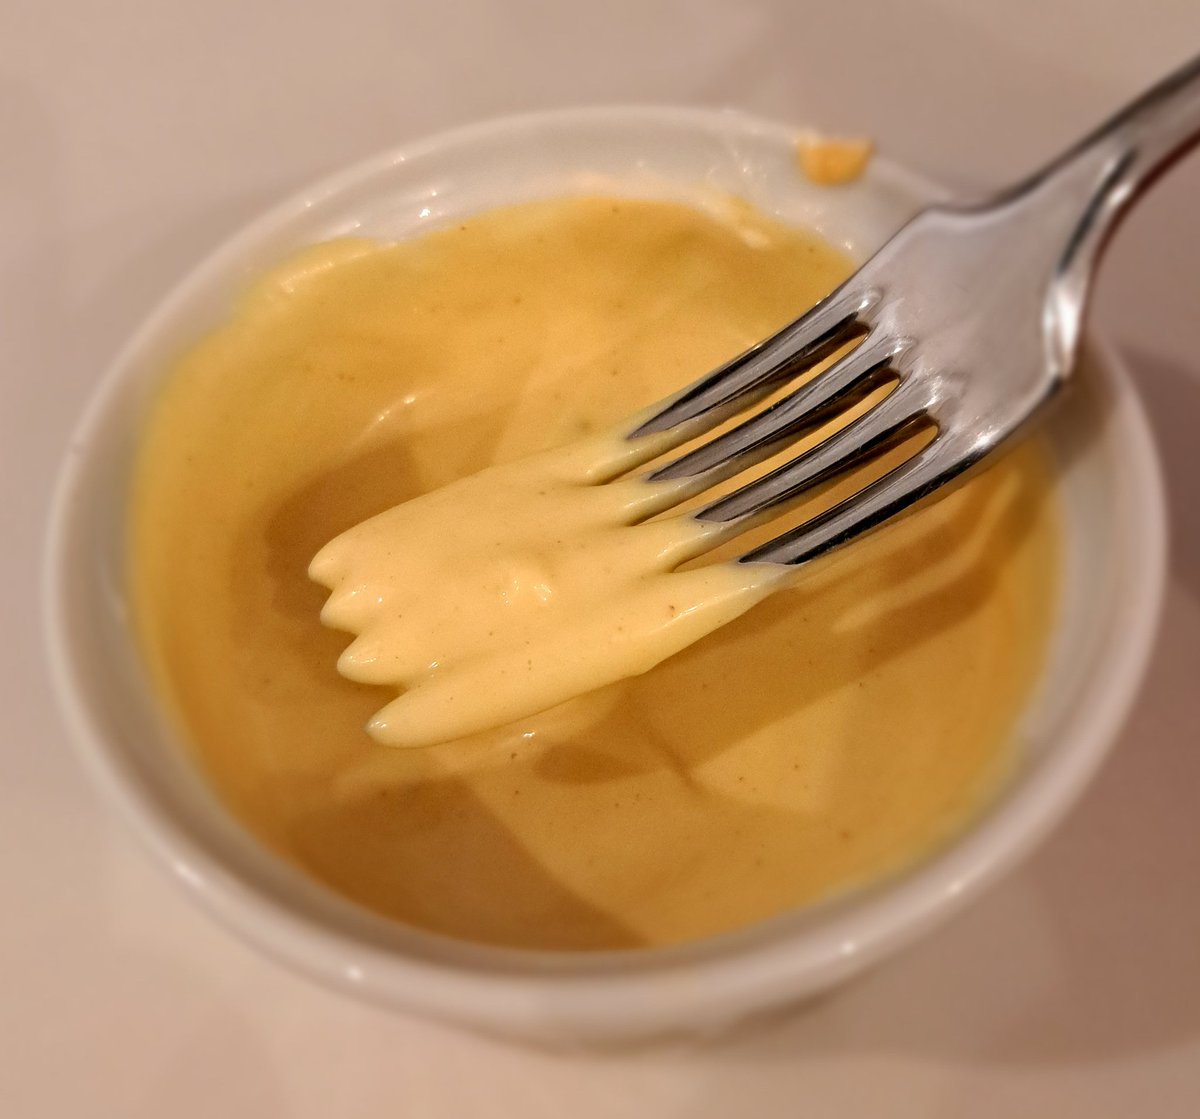 Unlikely to be a world's first, but it's very tasty - dijonaise! #Foodies #food #Sauce #Dijon #mayonnaise